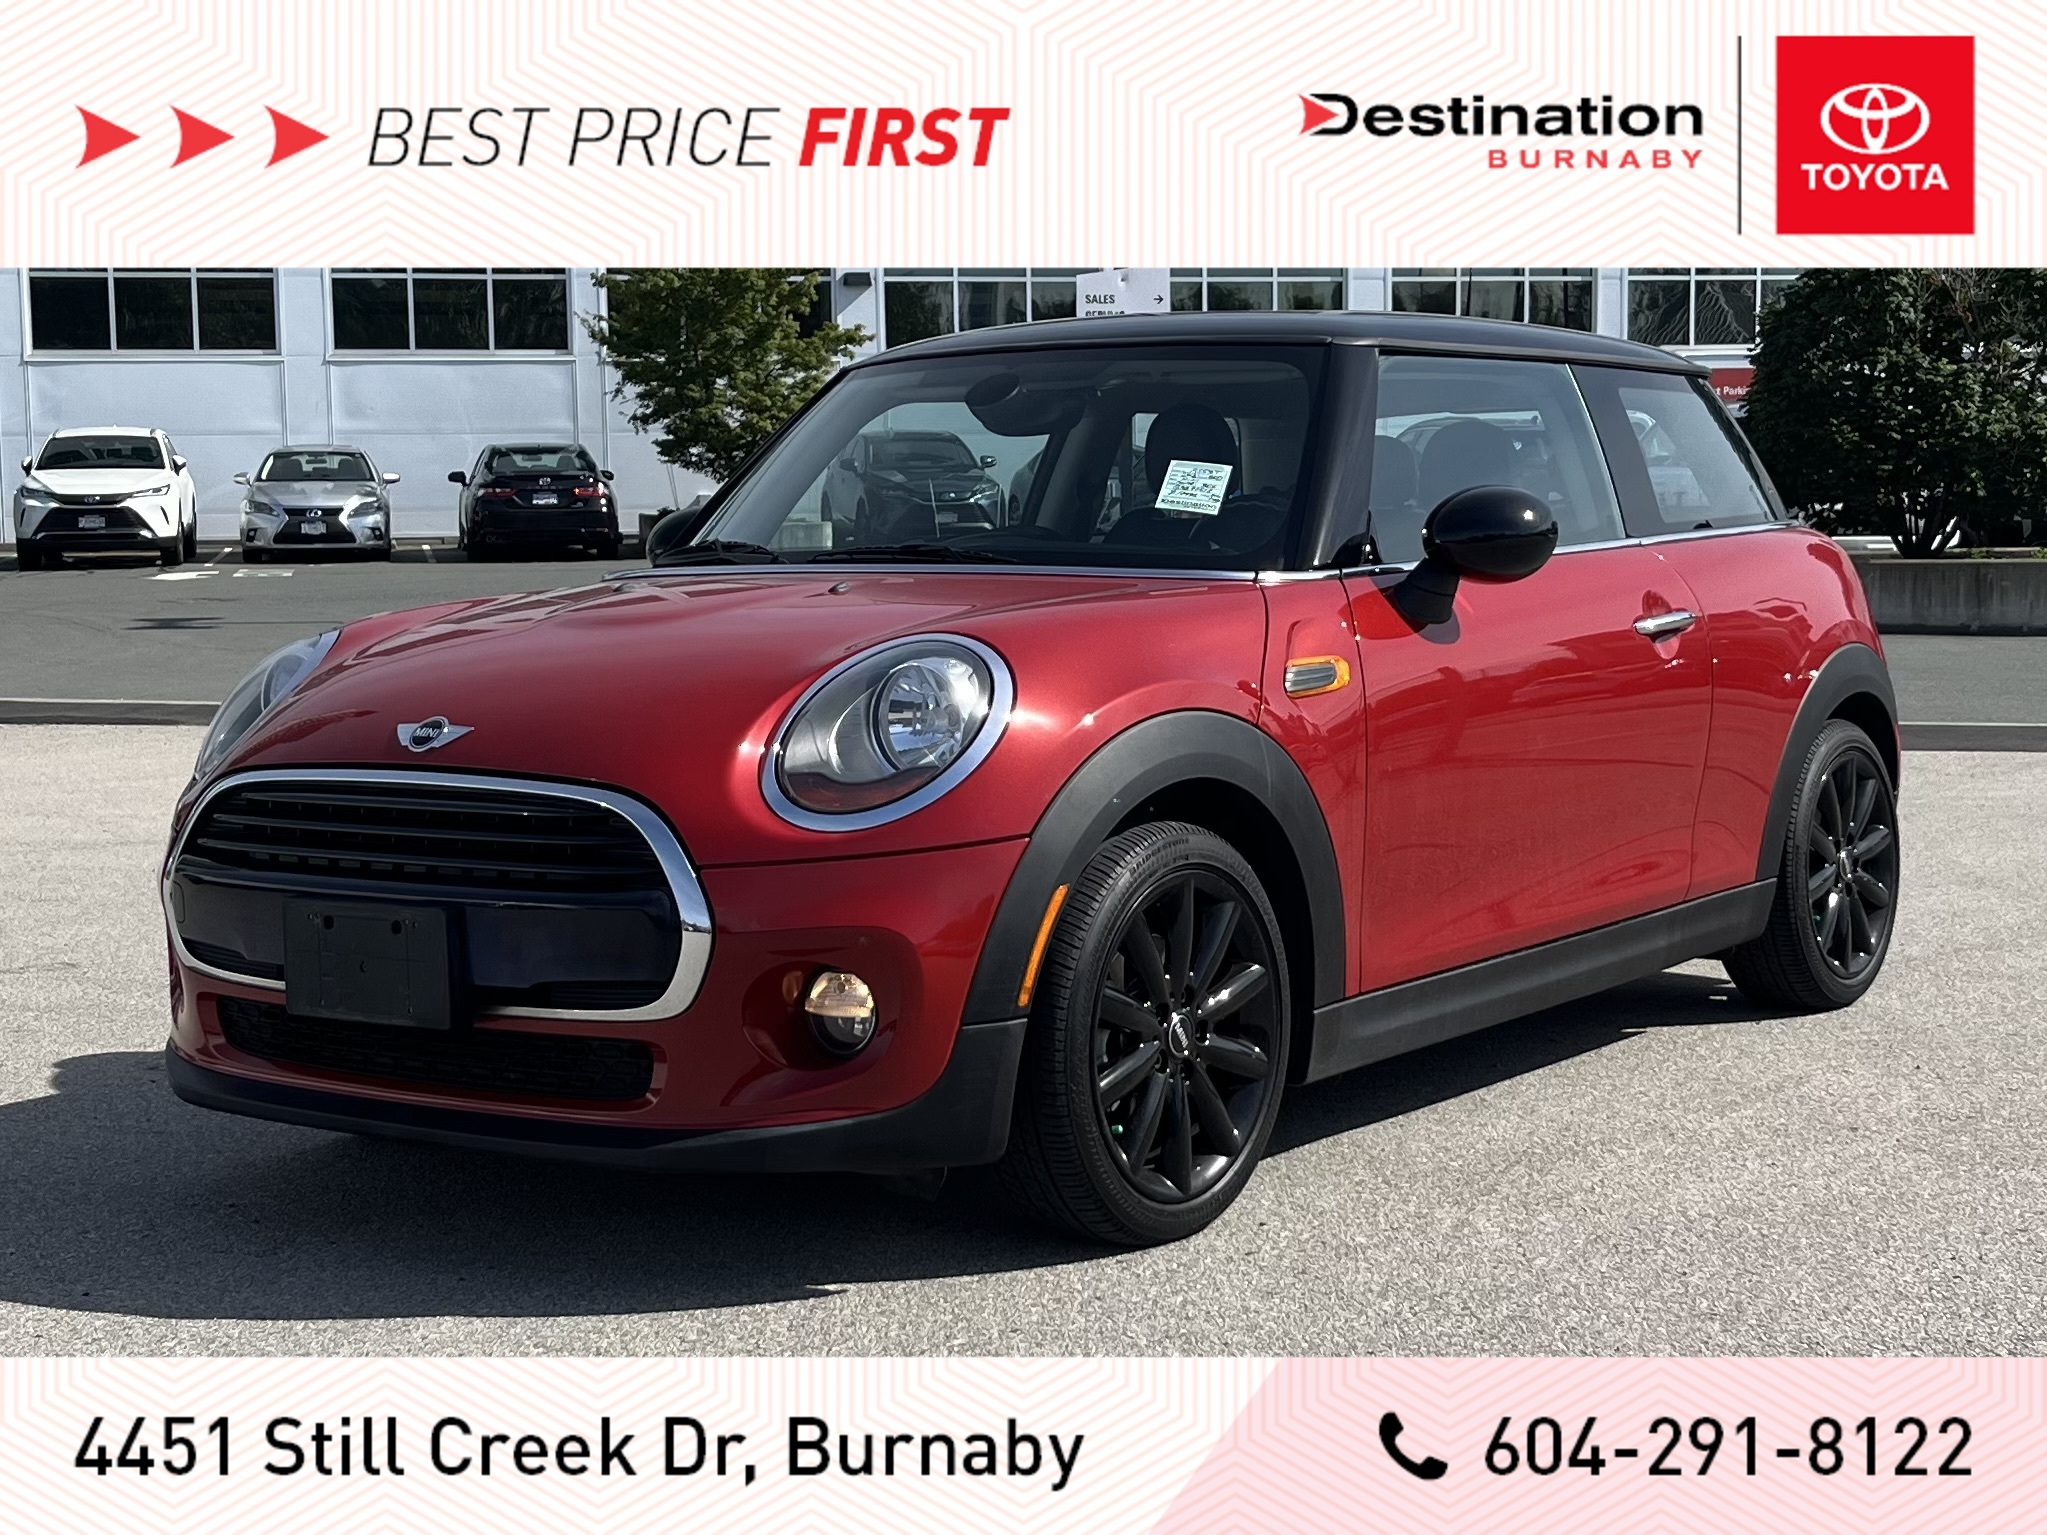 2016 MINI Cooper Hardtop 3DR w/Essential, Loaded, Leather